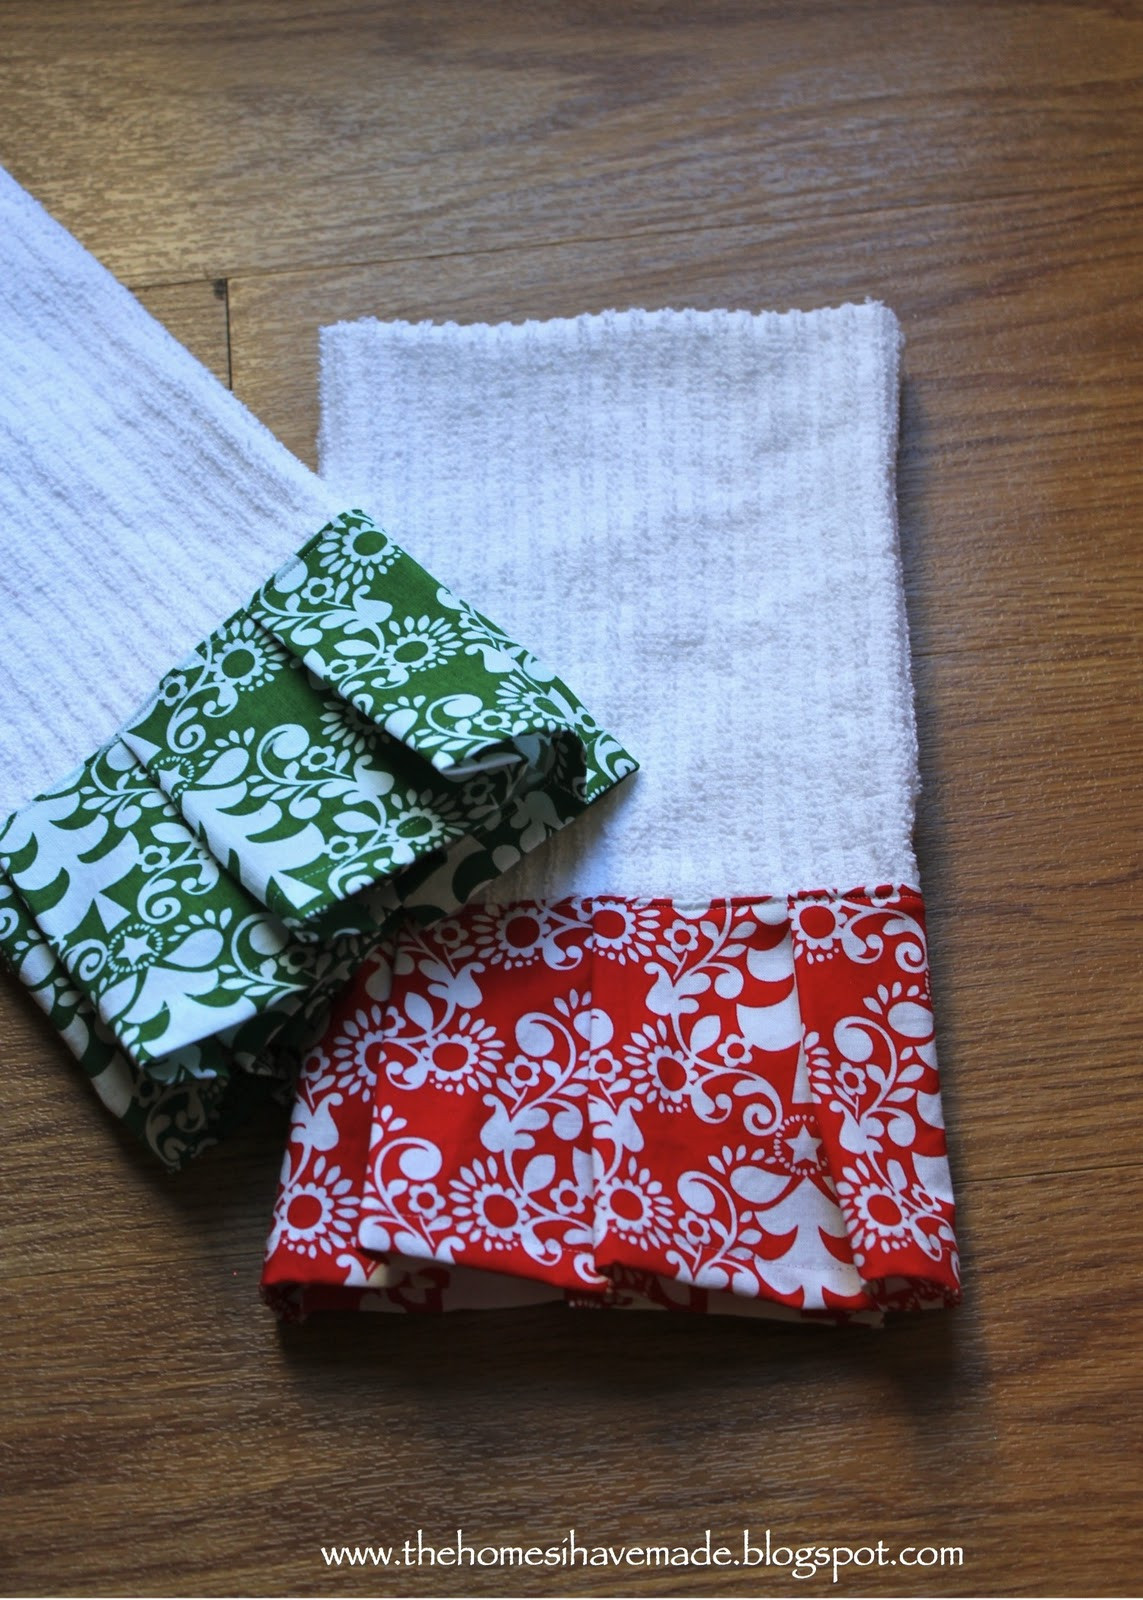 Christmas Kitchen Towels
 Homemade Christmas Embellished Dish Towels